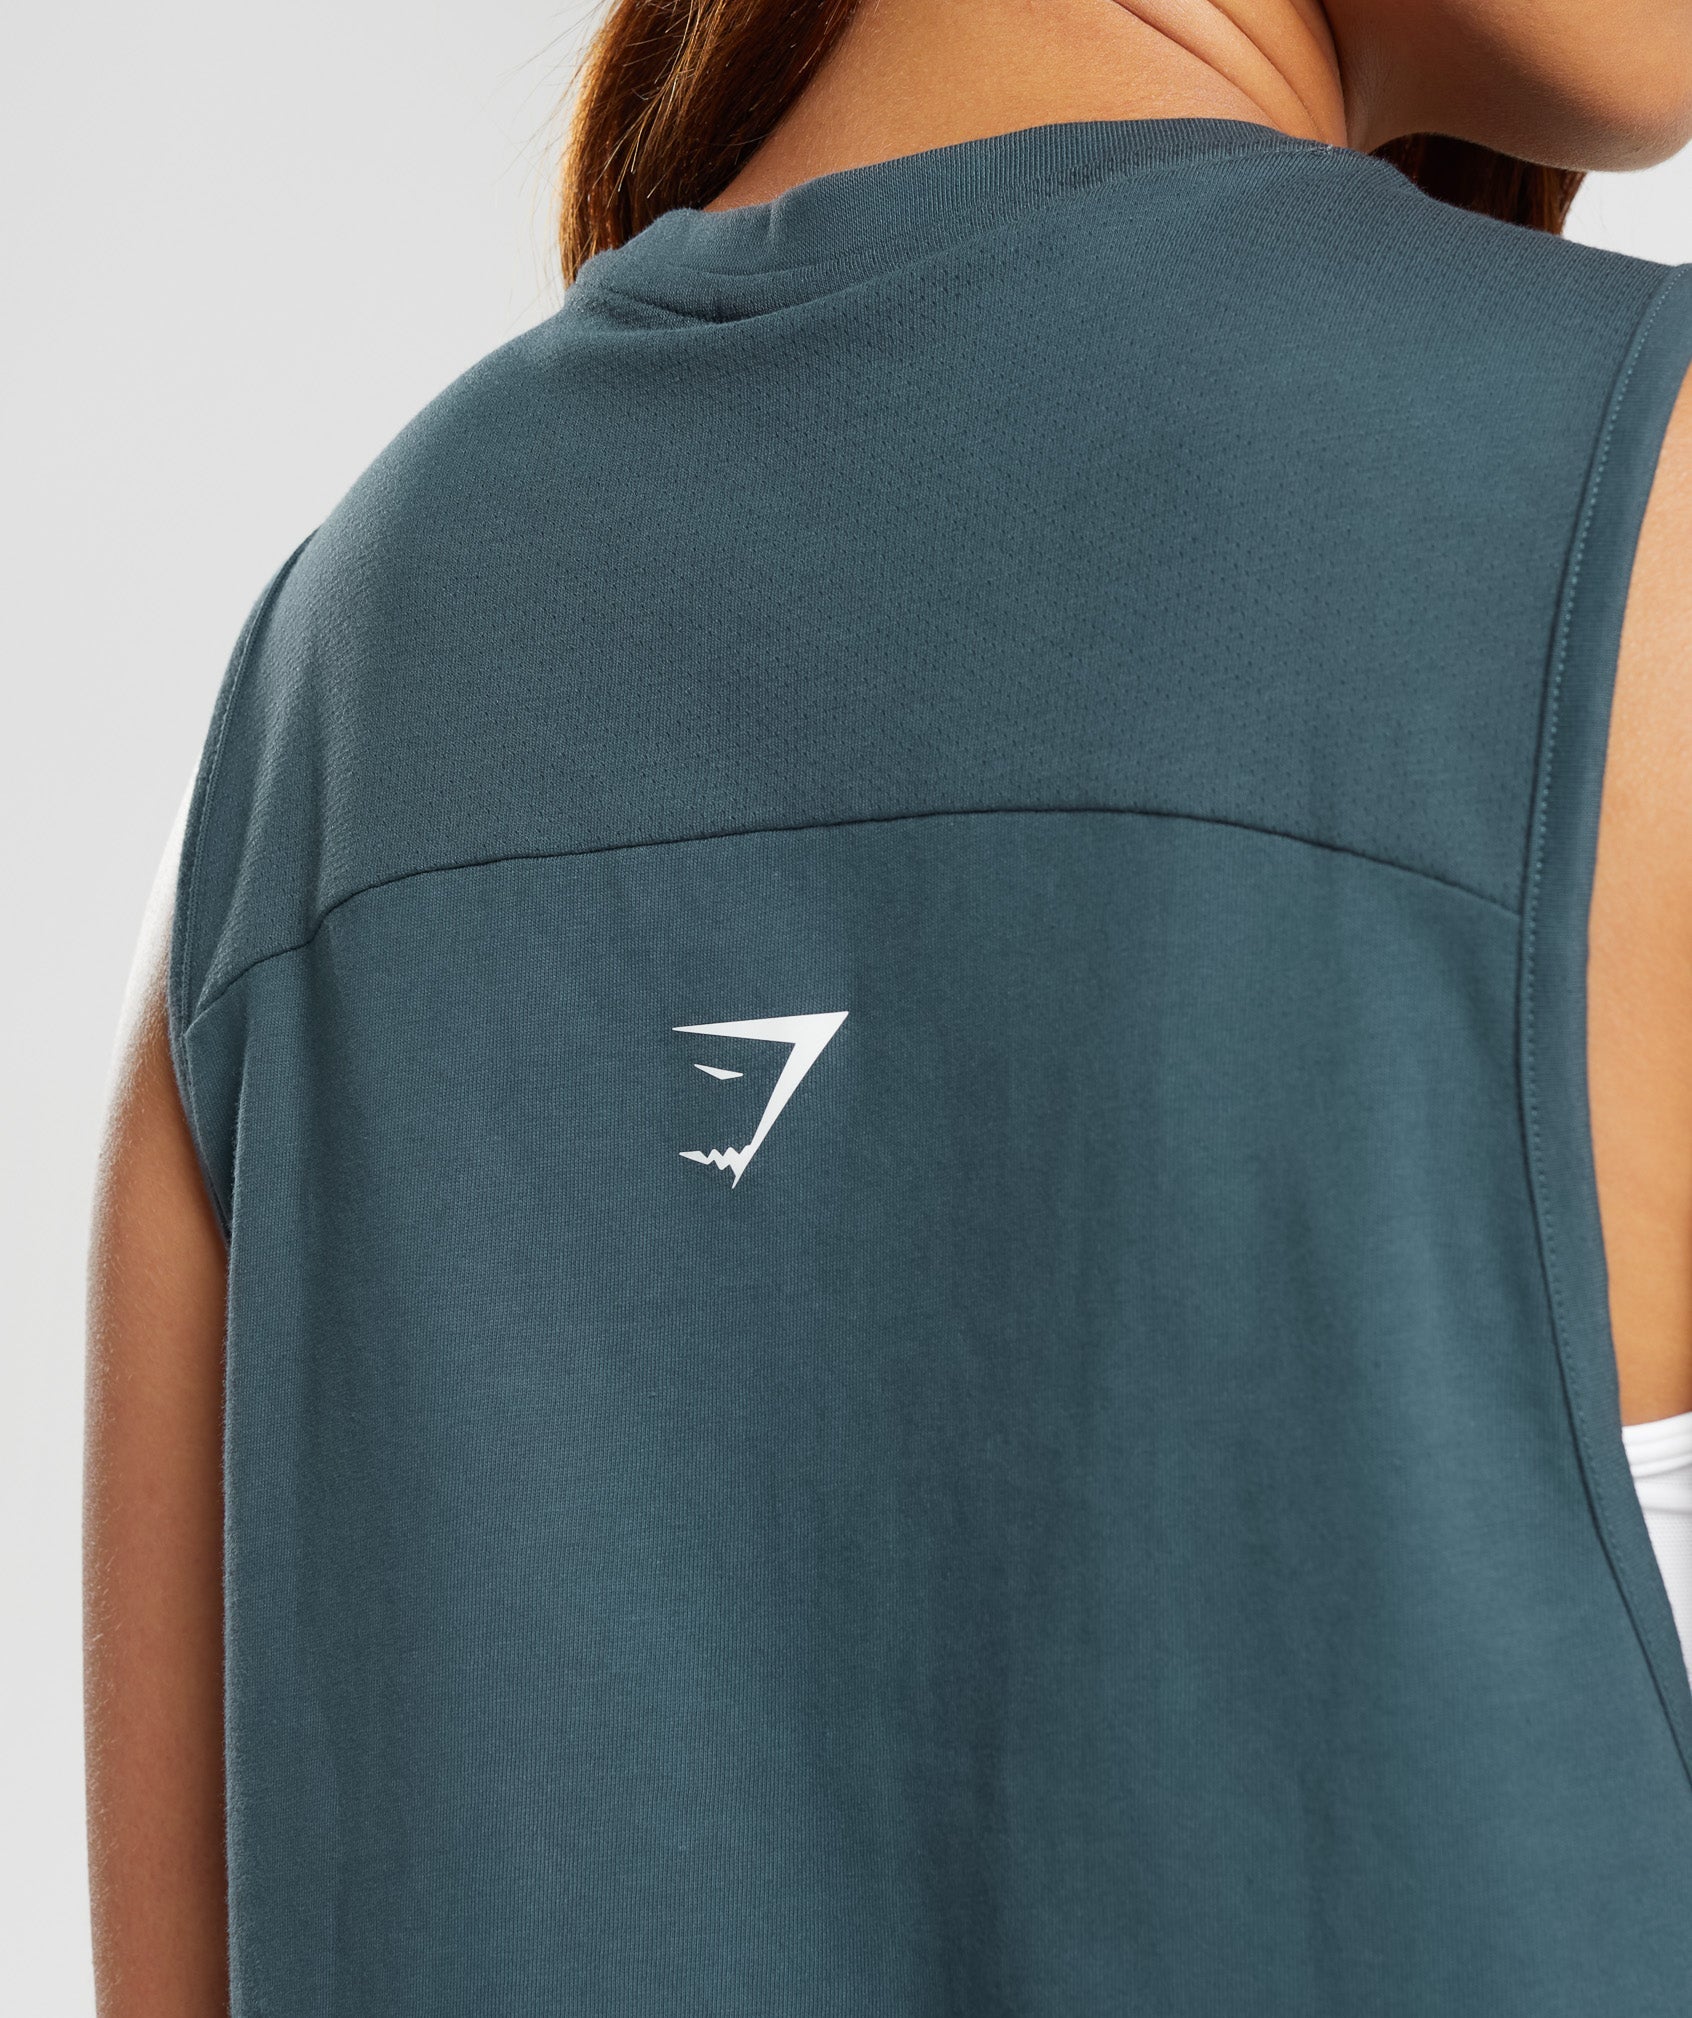 Fraction Tank in Smokey Teal - view 5